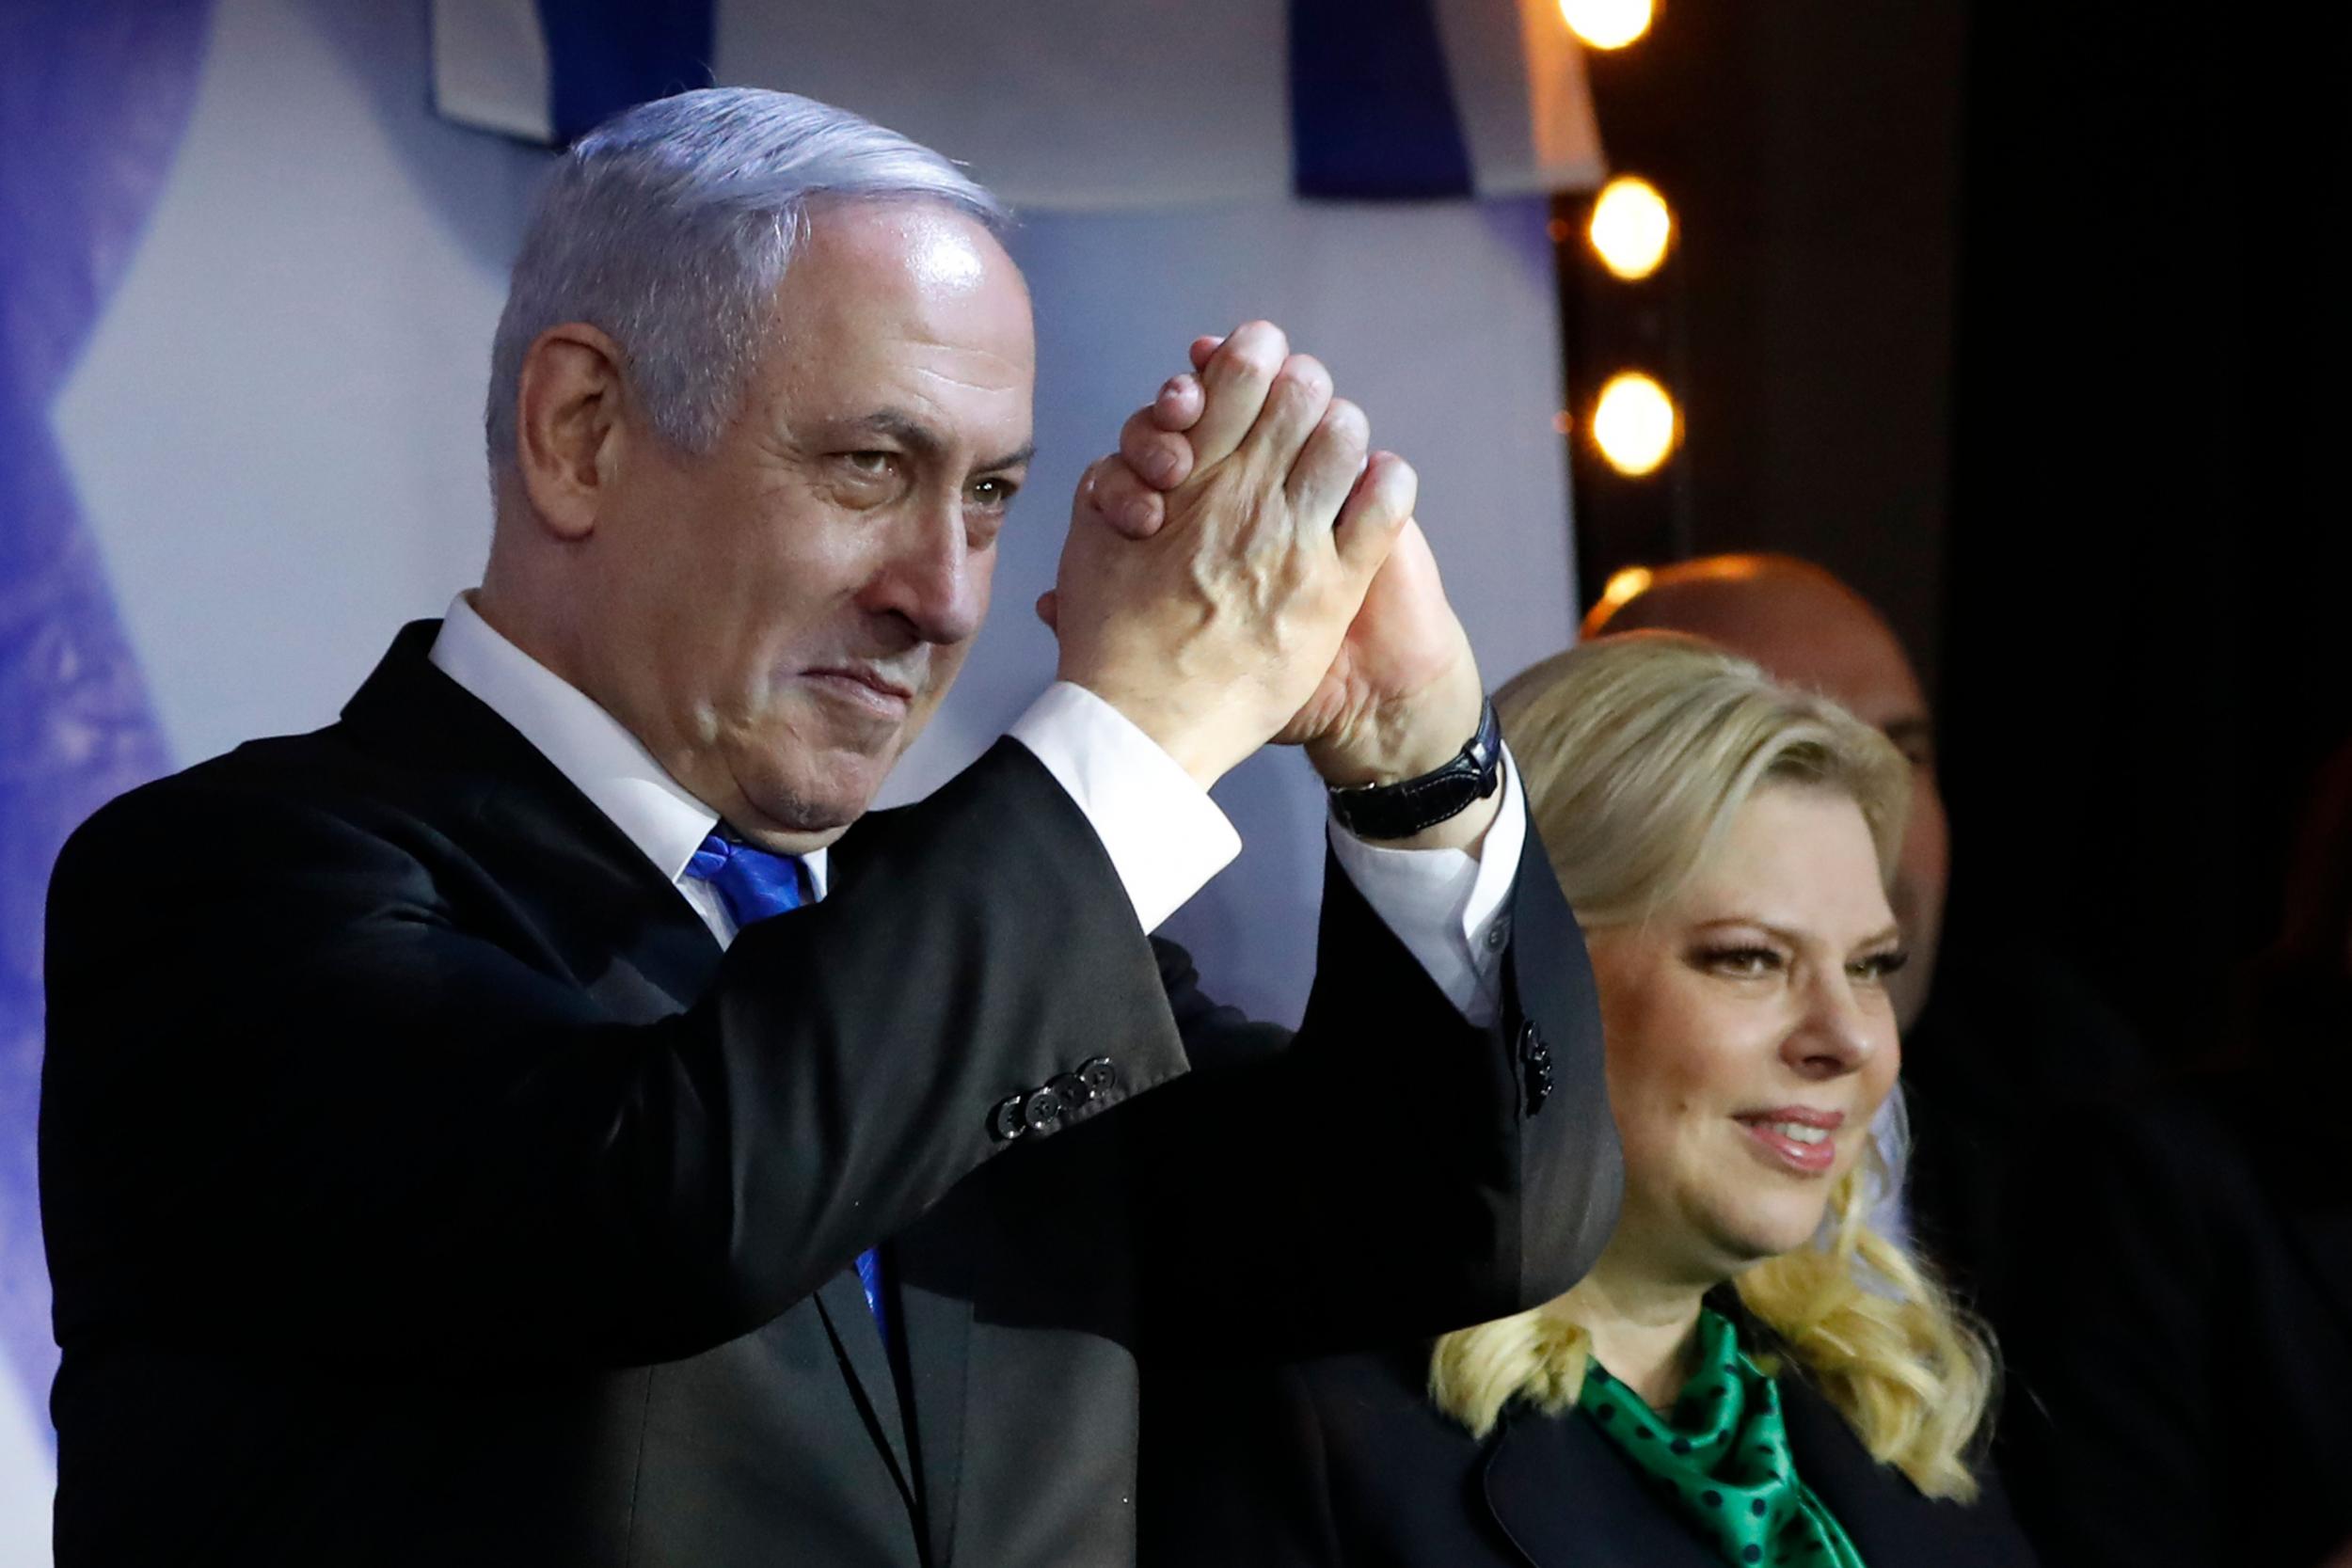 Israeli PM Benjamin Netanyahu has often hit out Arab citizens in his own country